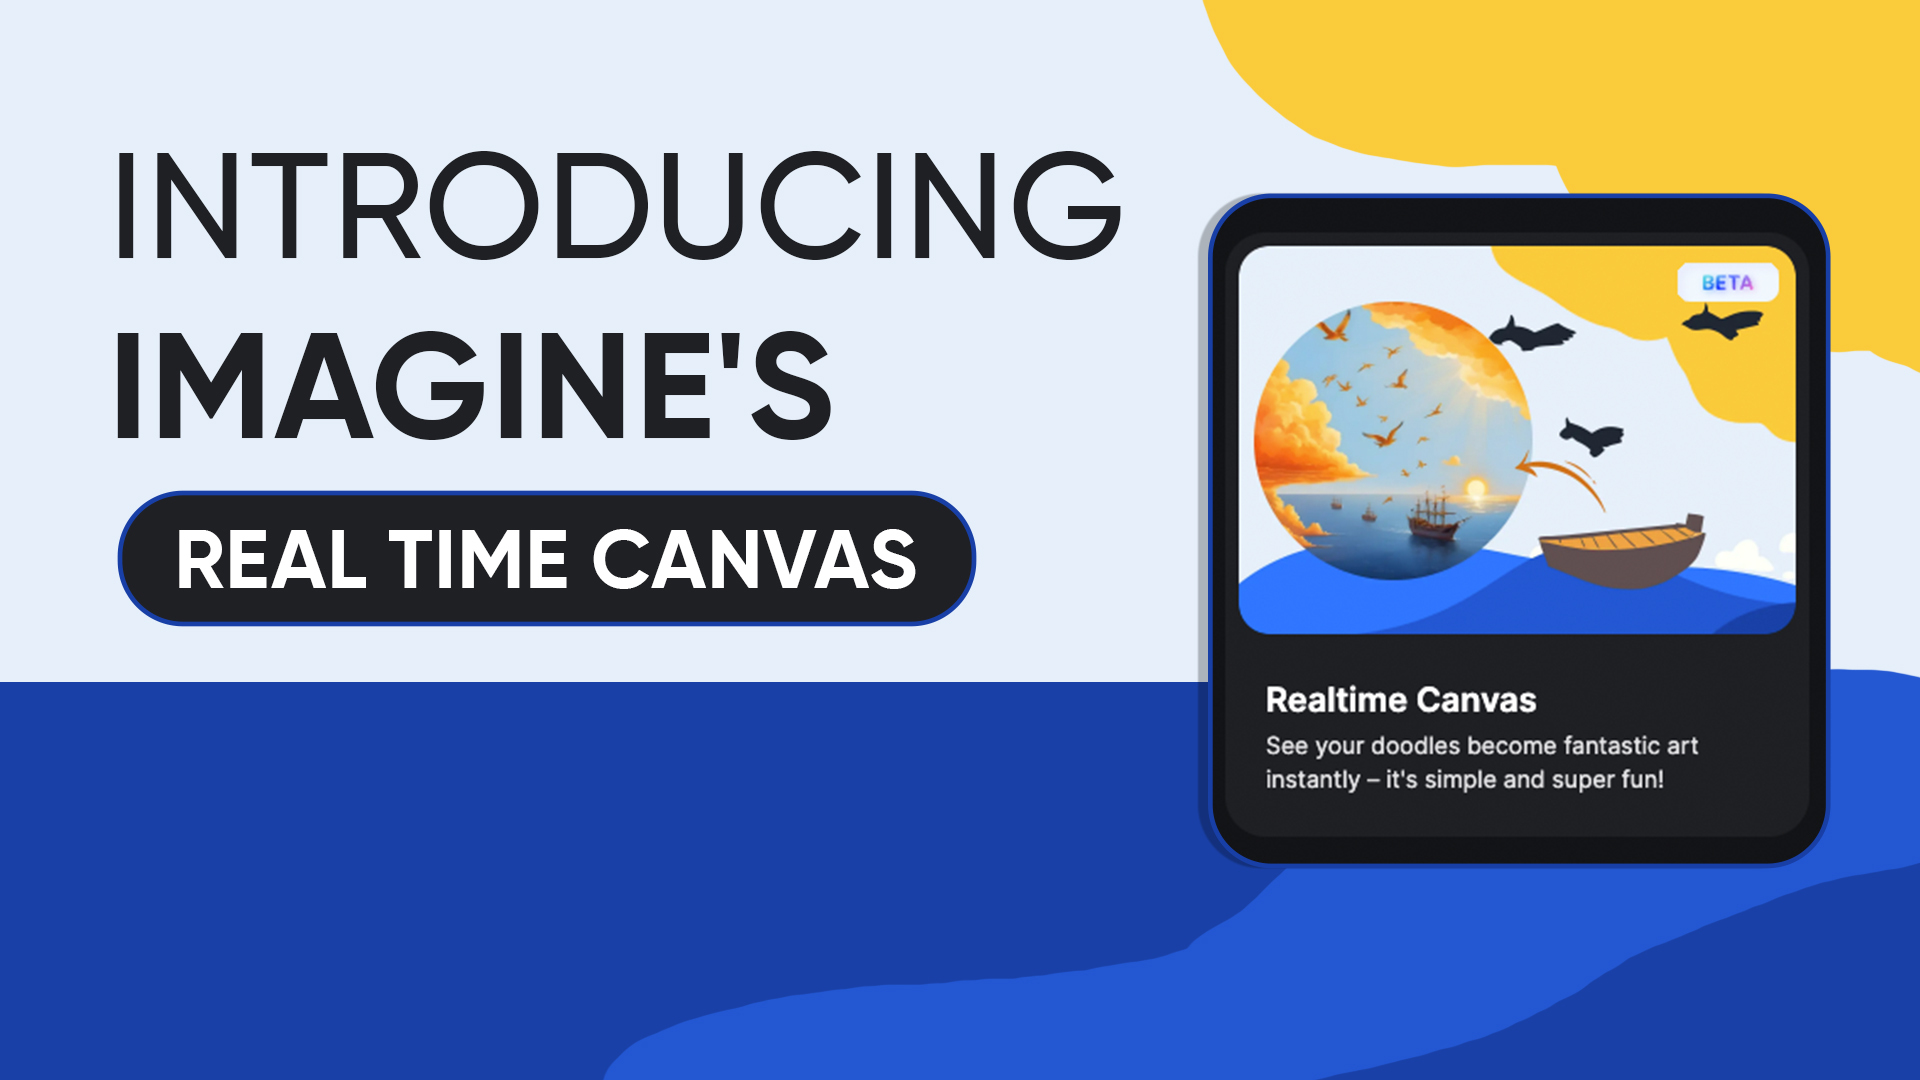 Introducing Imagine's Realtime Canvas!